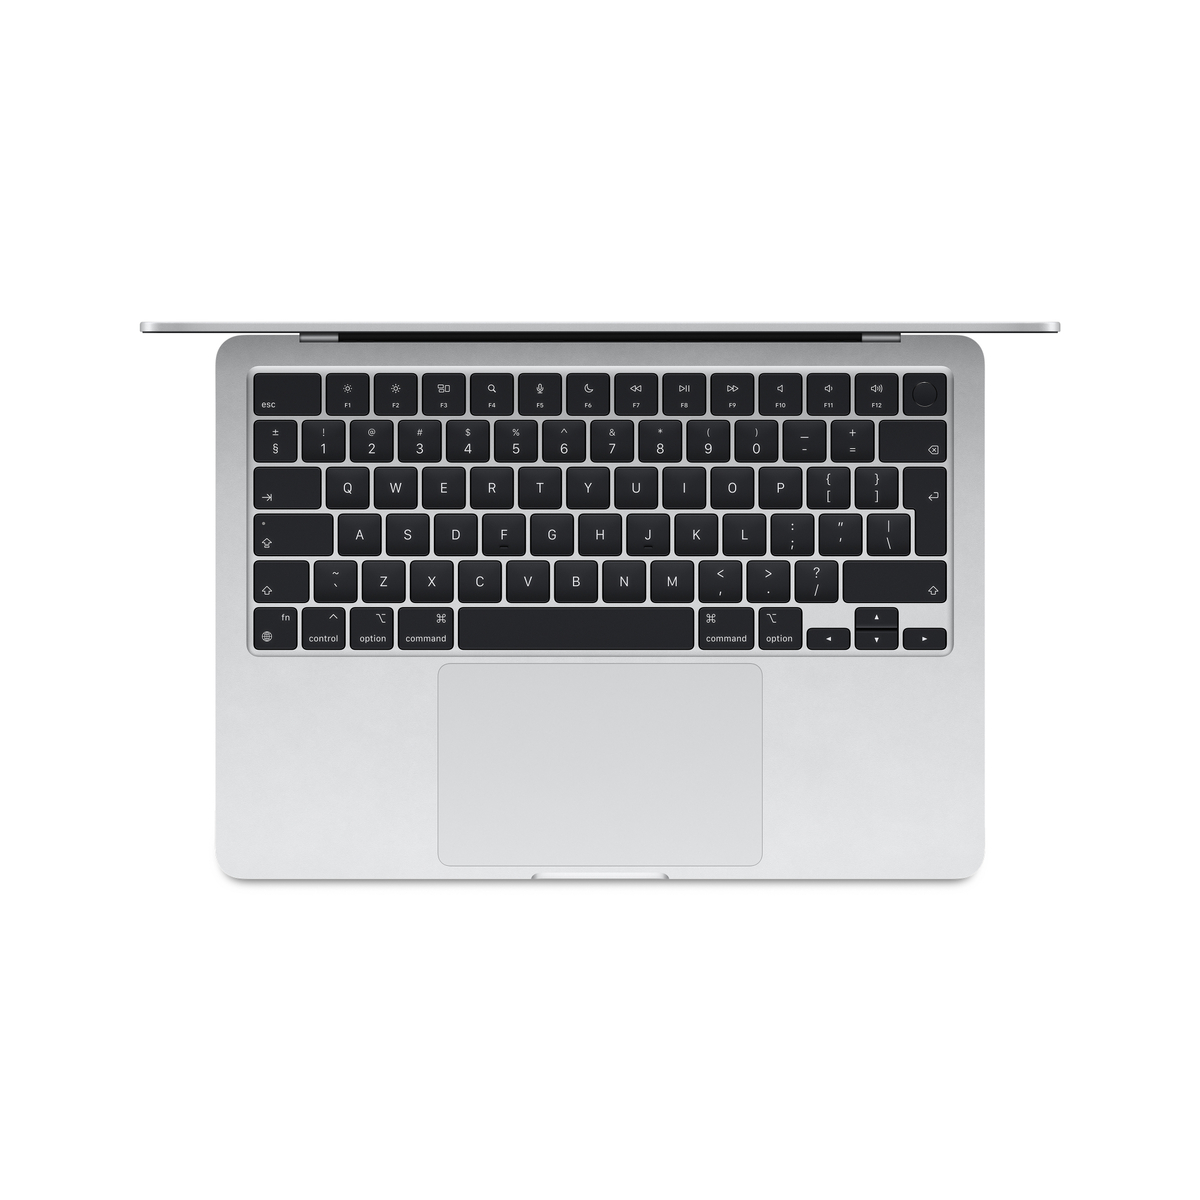 Apple MacBook Air, 13 inches, 8 GB RAM, 512 GB SSD, Apple M3 chip with 8-core CPU and 10-core GPU, macOS, Arabic, Silver